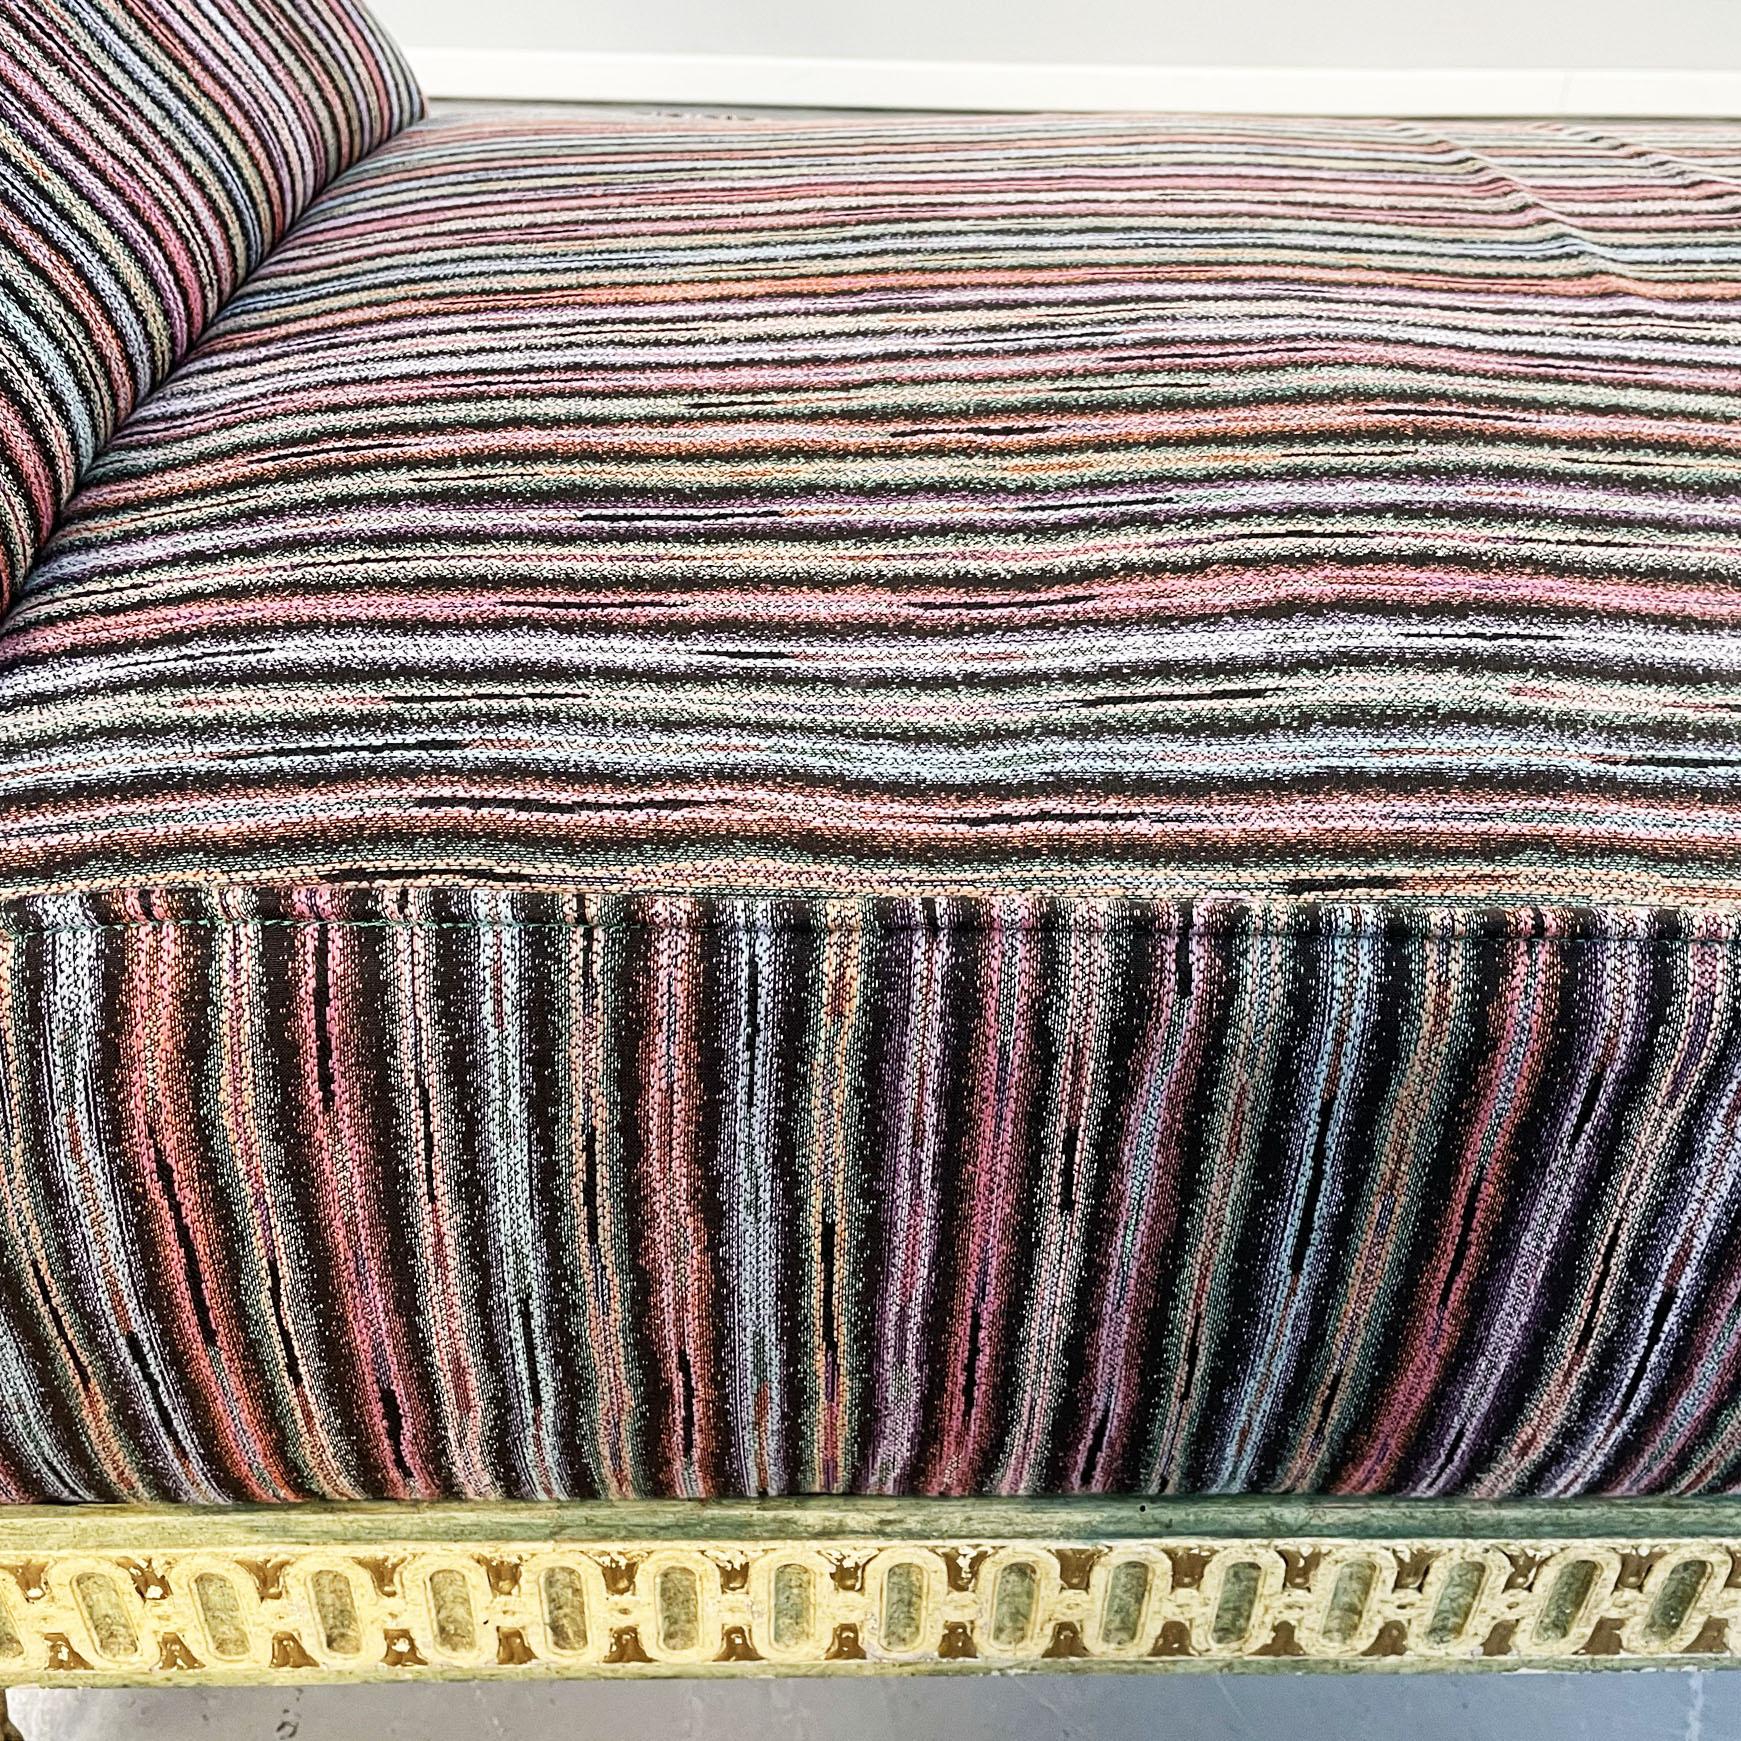 Italian Midcentury Venetian Style Chaise Longue with Missoni Striped Fabric, 1950 For Sale 4